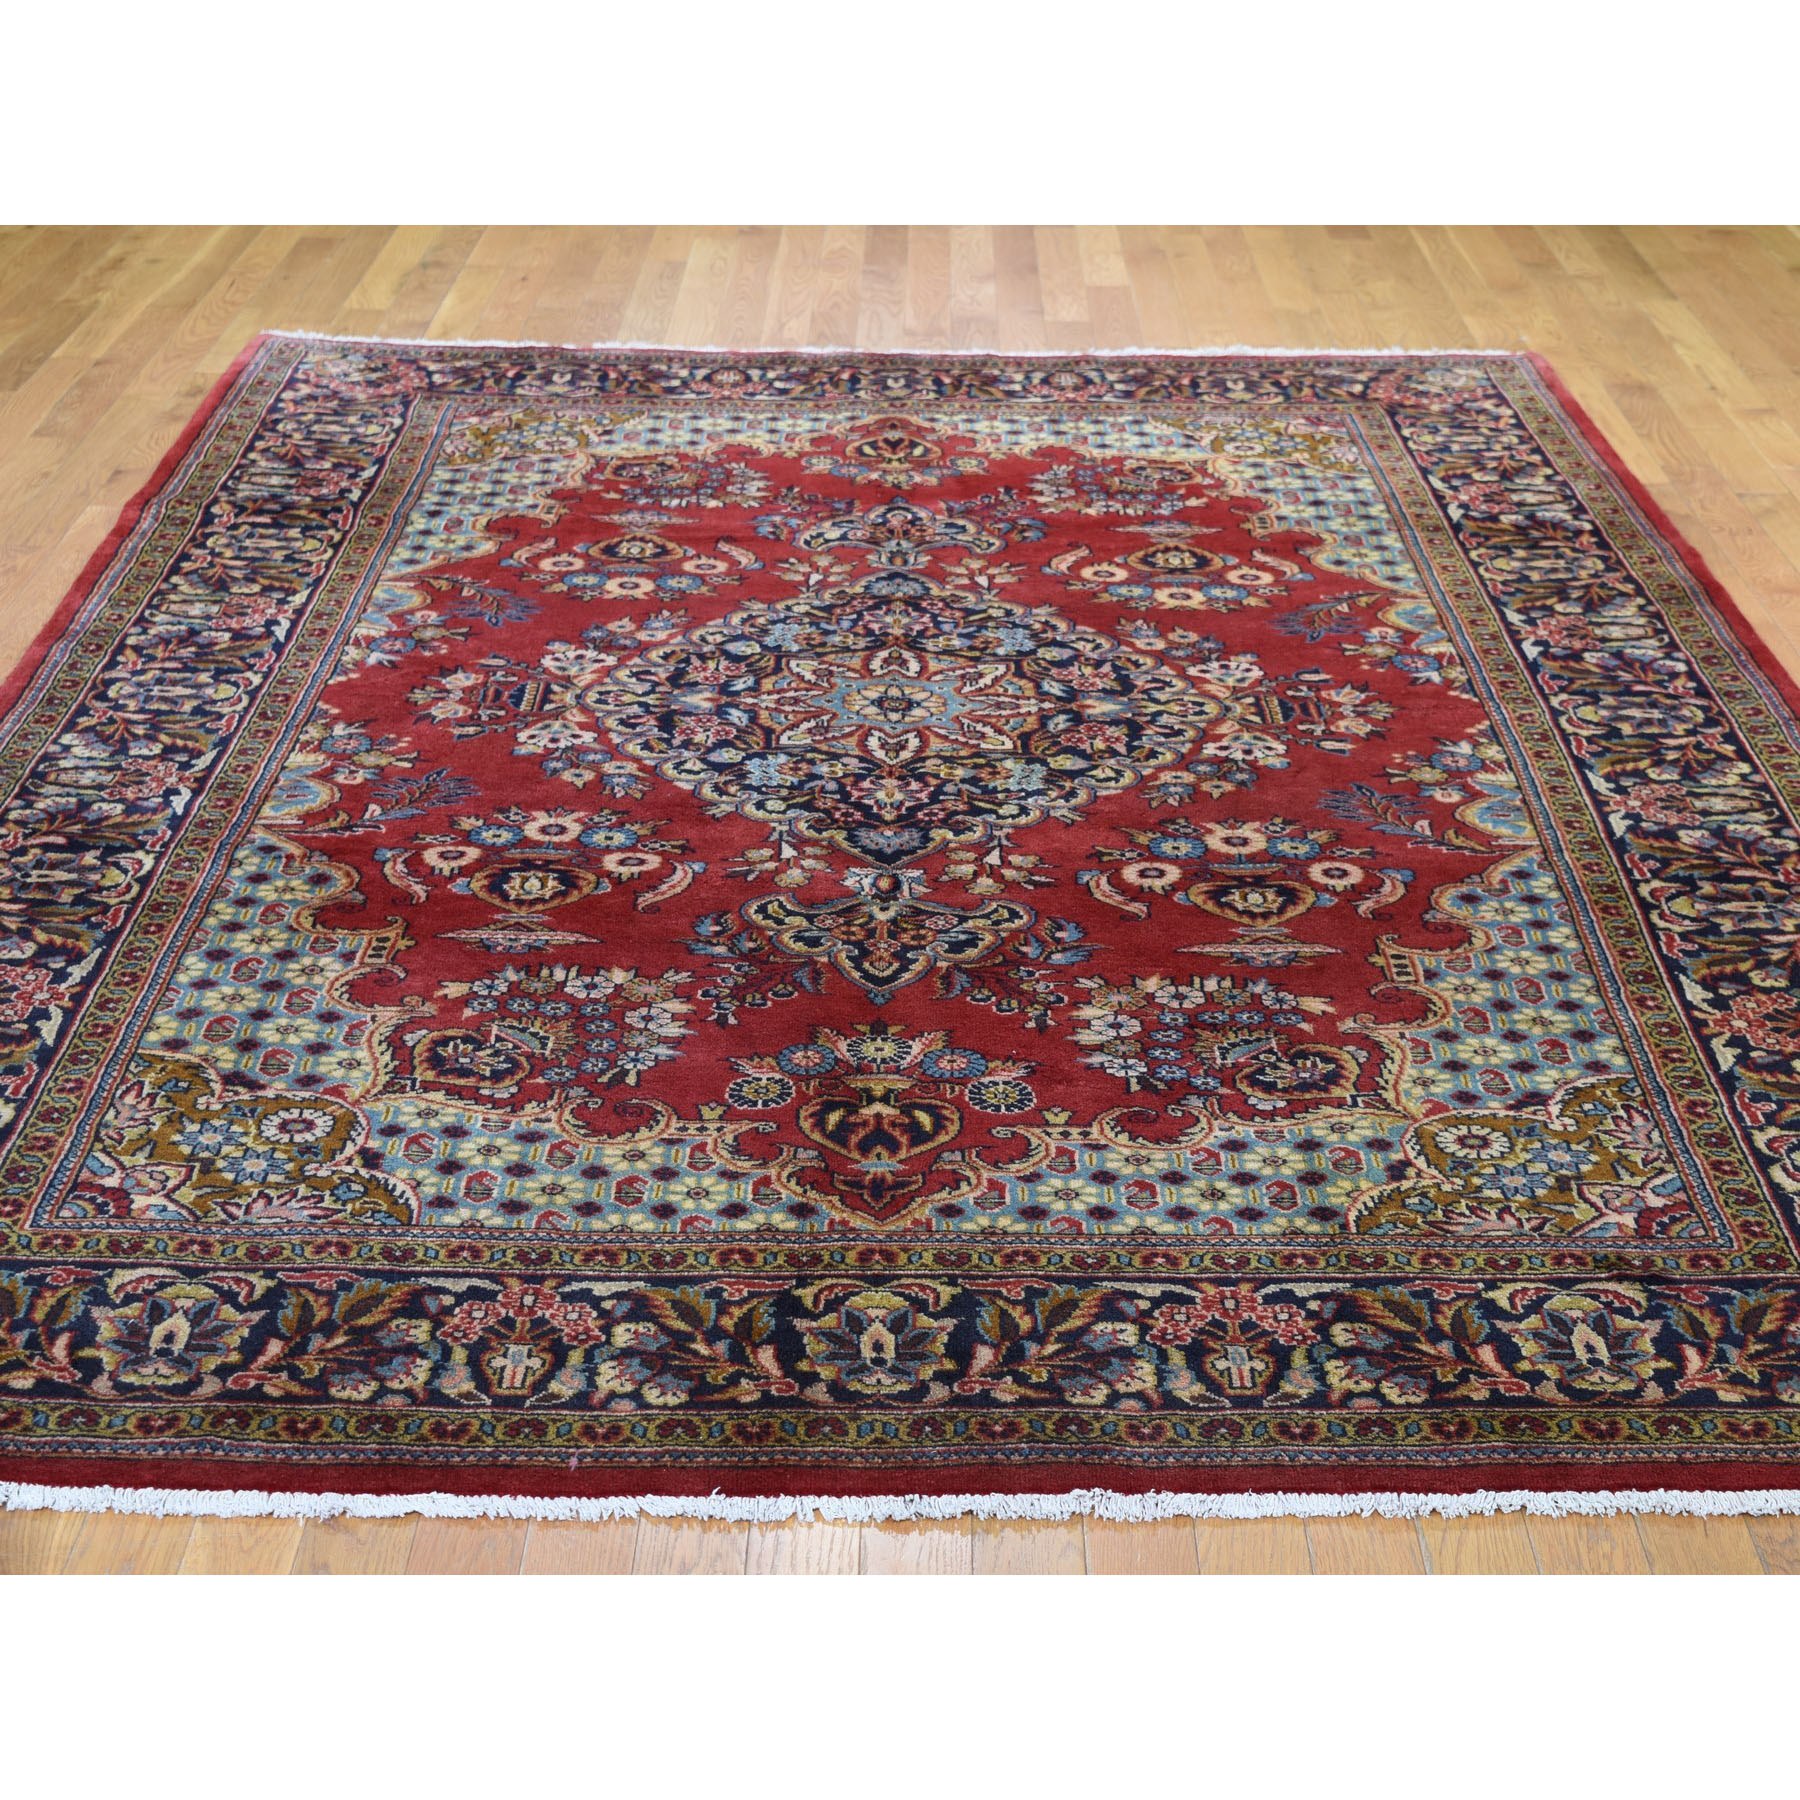 7'2"x10'5" Red New Persian Tabriz Pure Wool Full Pile Hand Woven Oriental Rug 